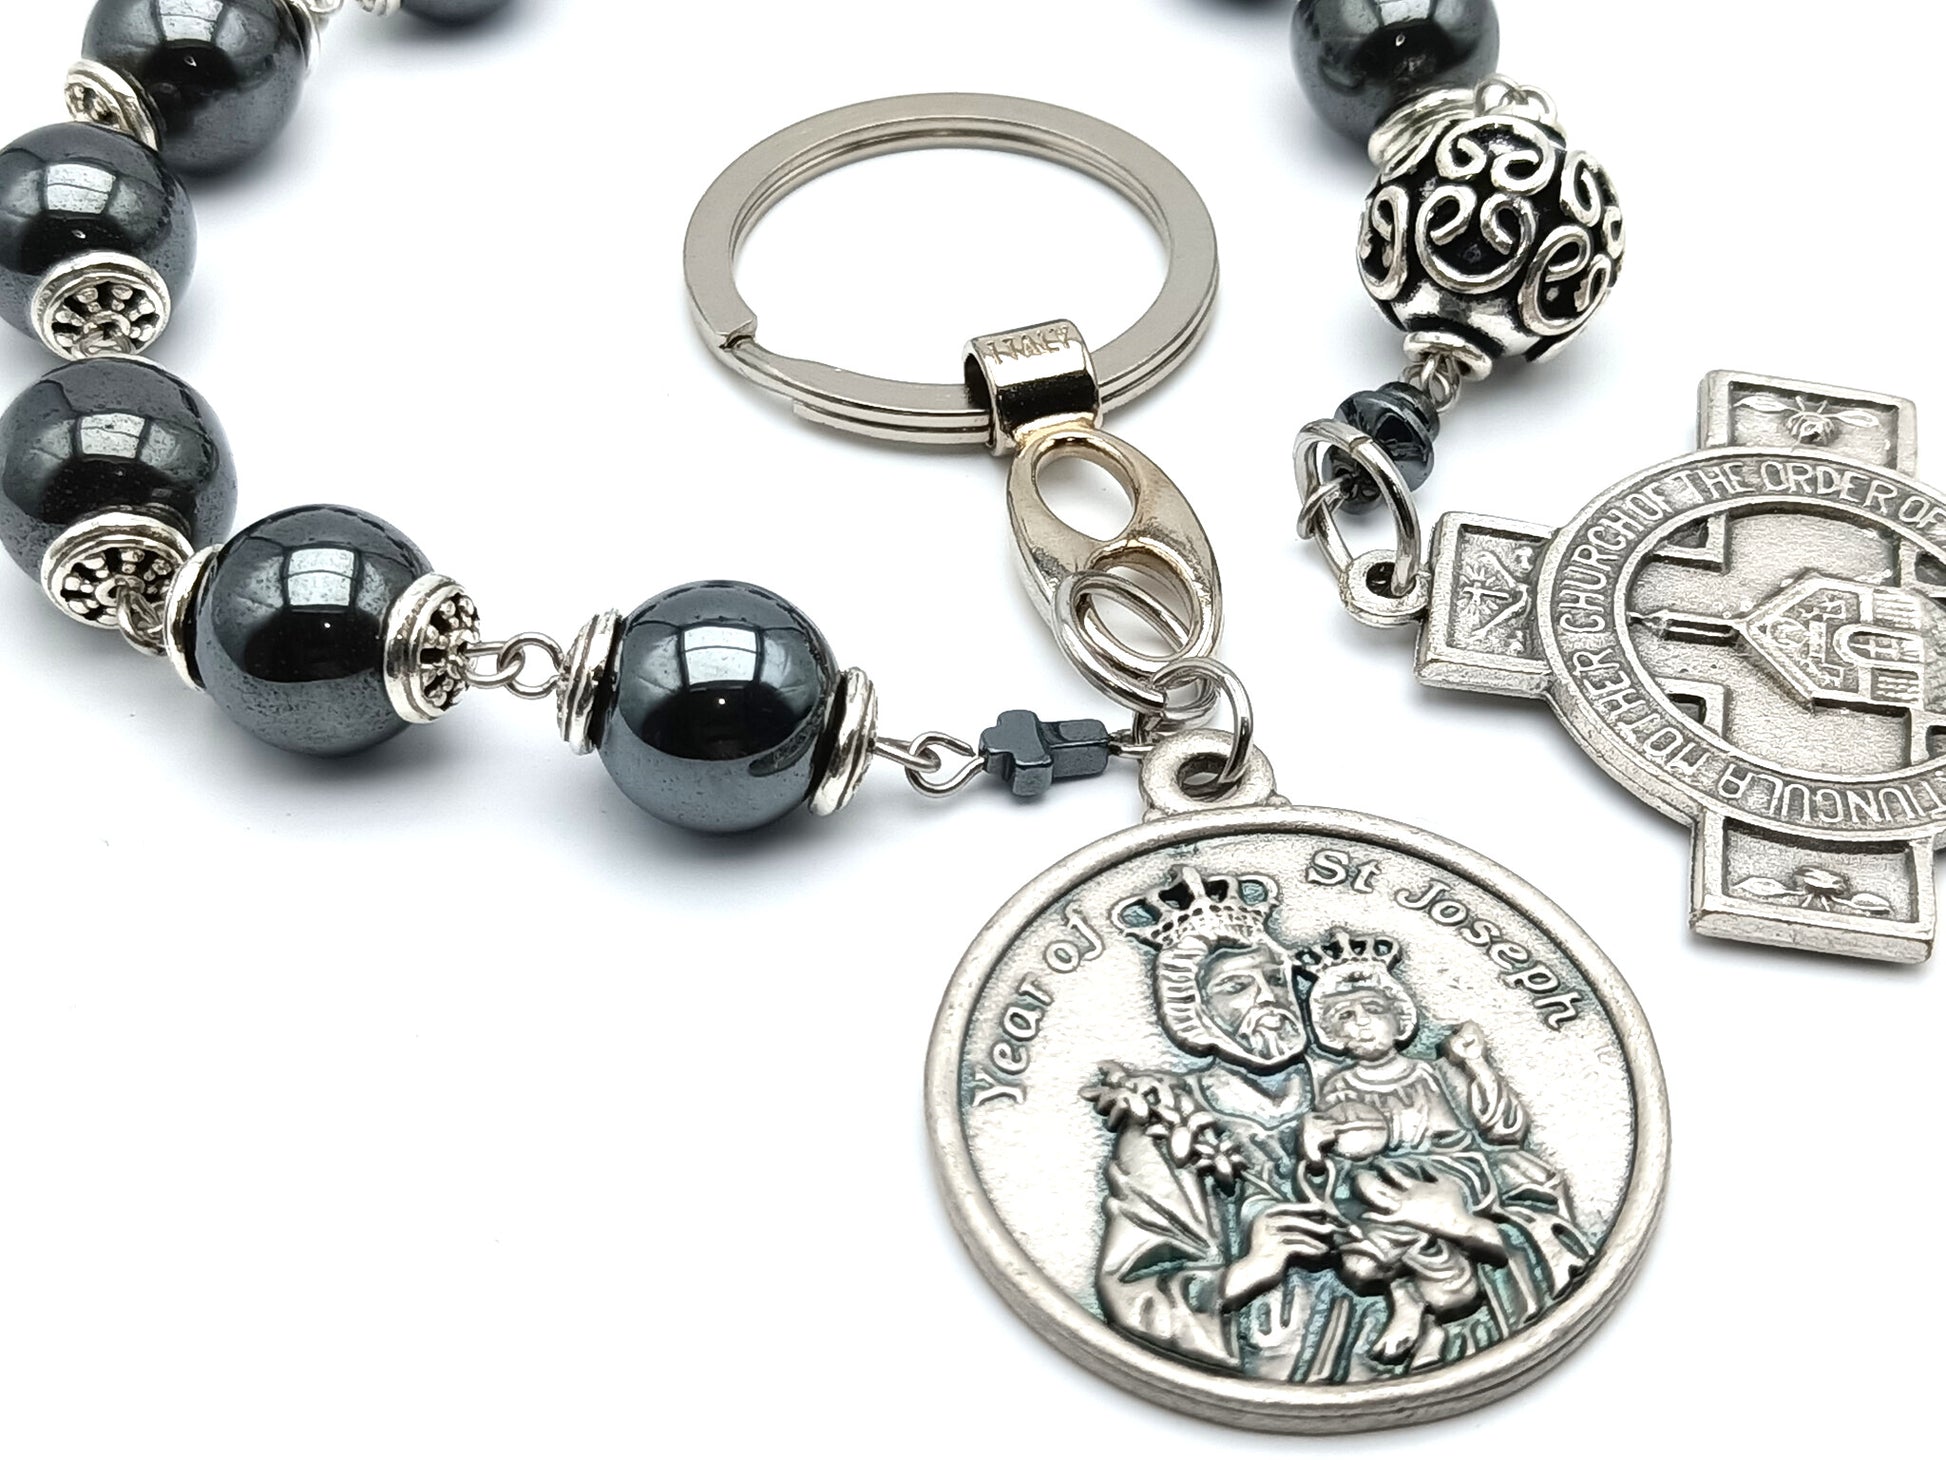 Year of Saint Joseph unique rosary beads decade rosary with hematite beads, silver Saint Francis crucifix and Saint Joseph medal.